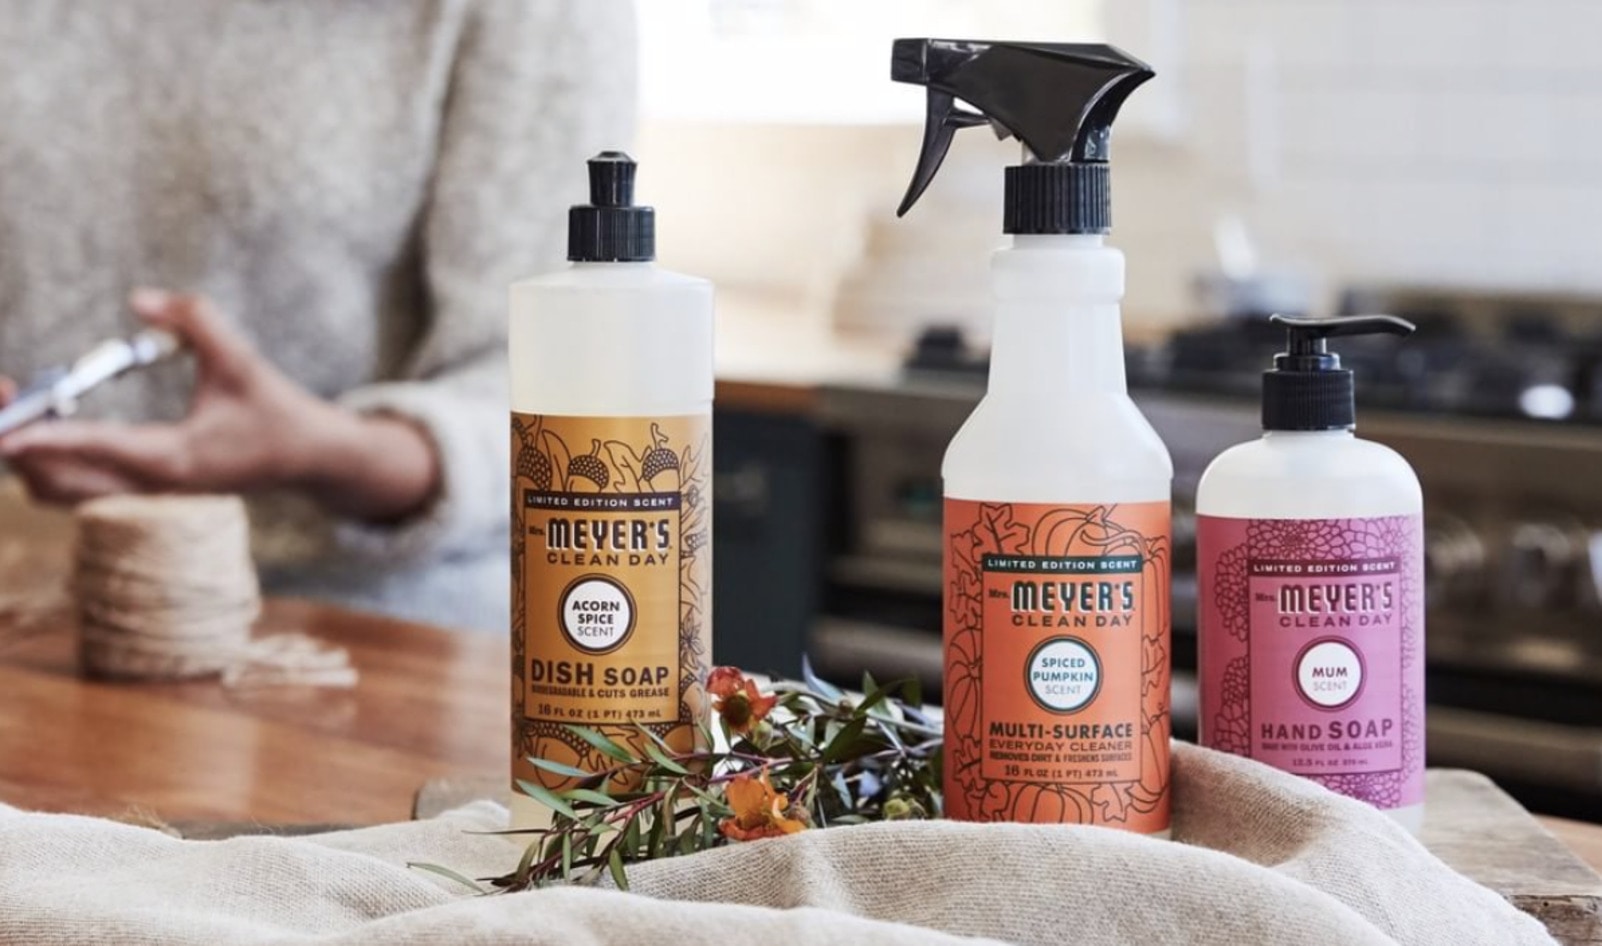 8 Non-Toxic House Cleaning Products to Make Your Vegan Home Sparkle